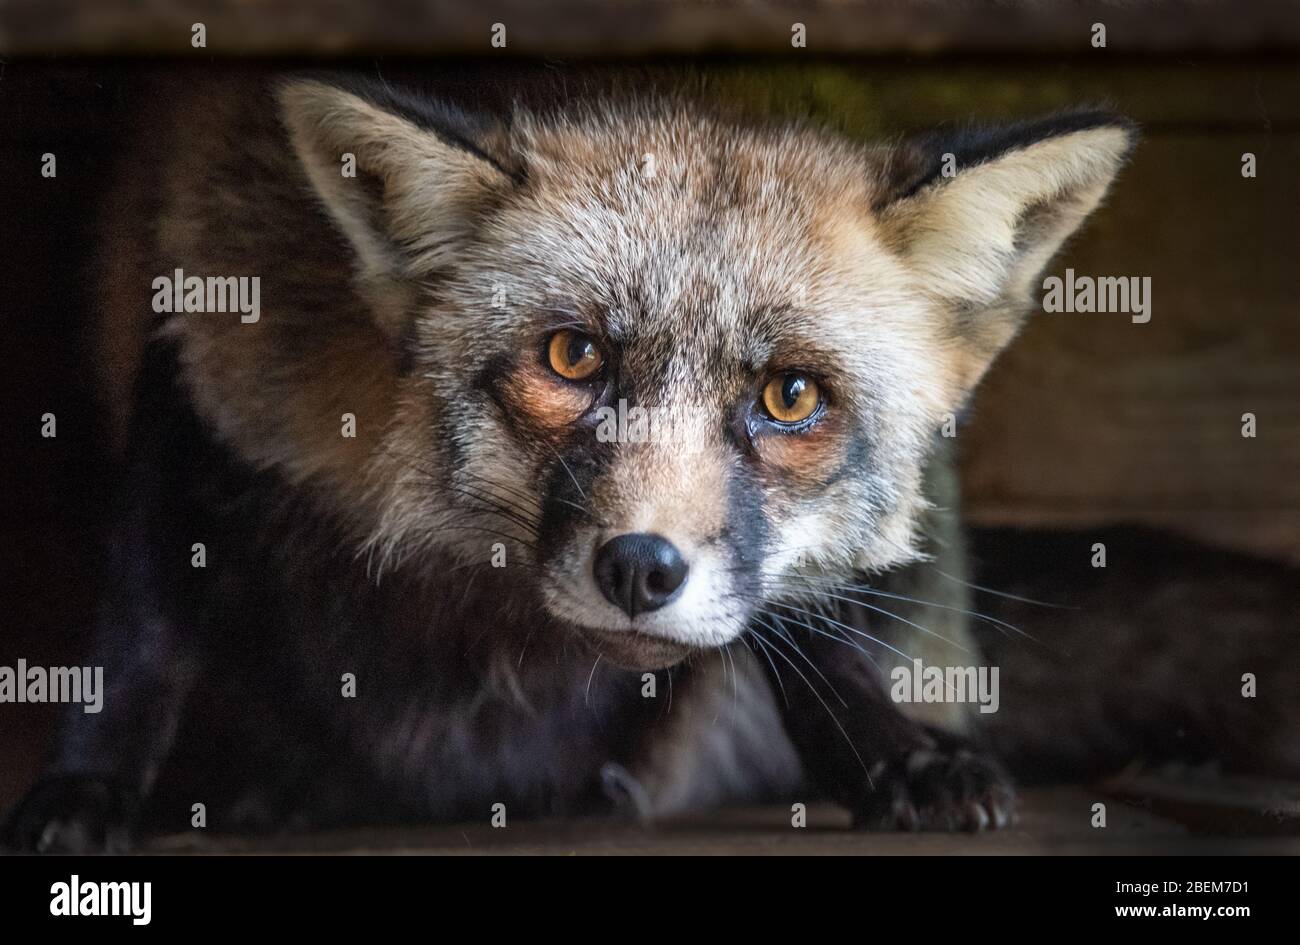 A very close portrait of the head and face of a fox. It is staring inquisitively straight at the camera with eyes wide open Stock Photo